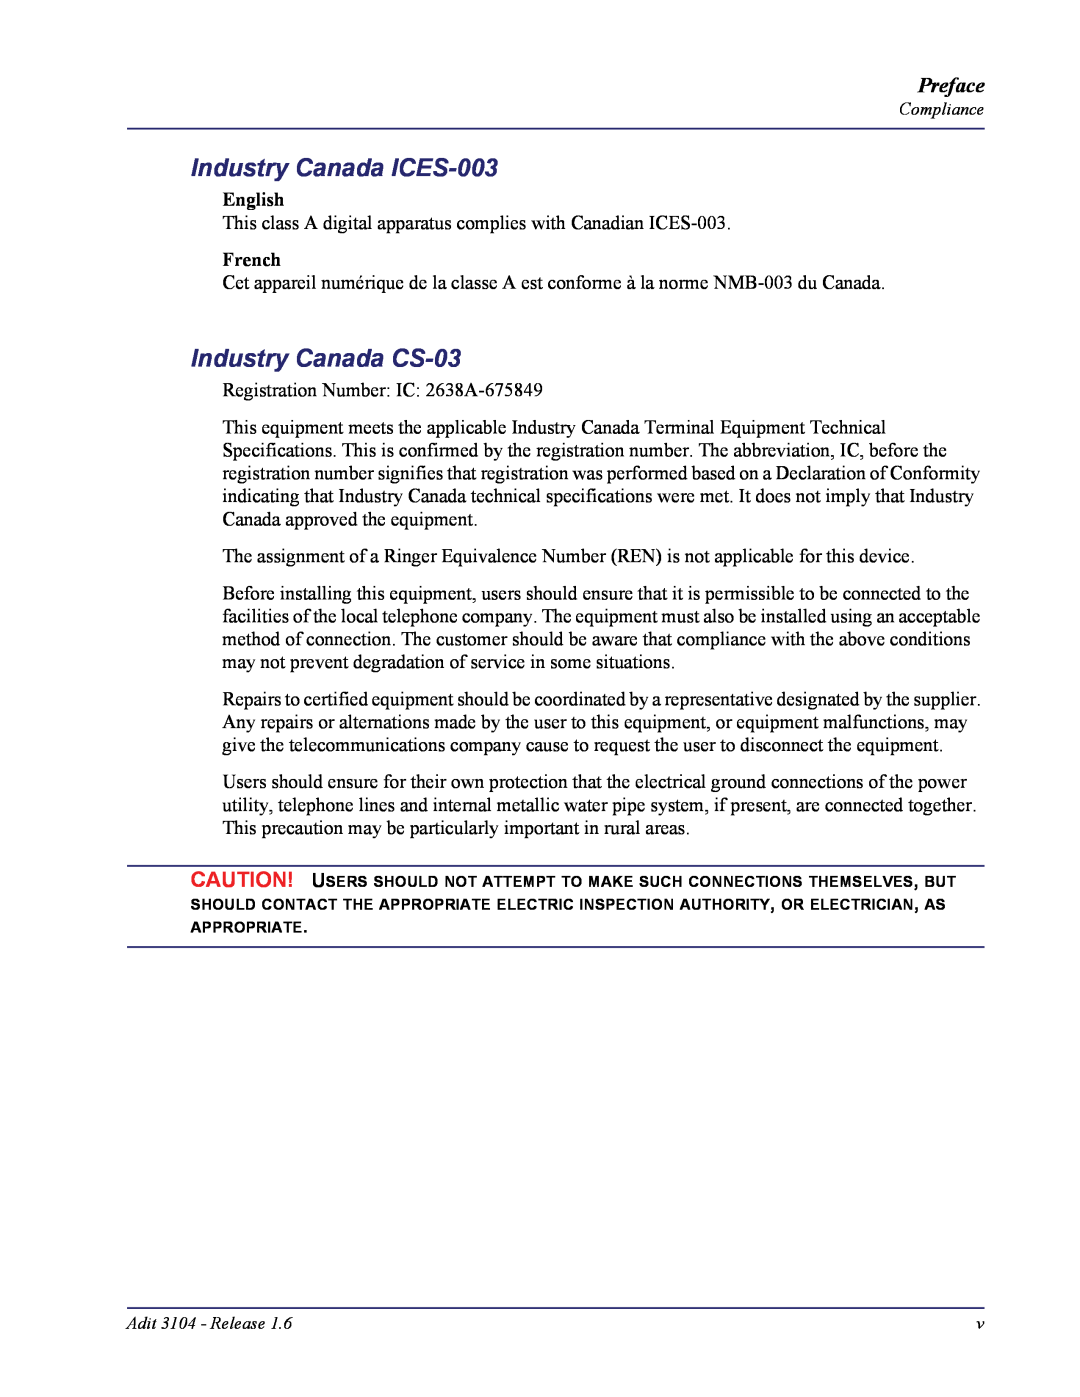 Carrier Access Adit 3104 user manual Industry Canada ICES-003, Industry Canada CS-03, Preface, English, French 